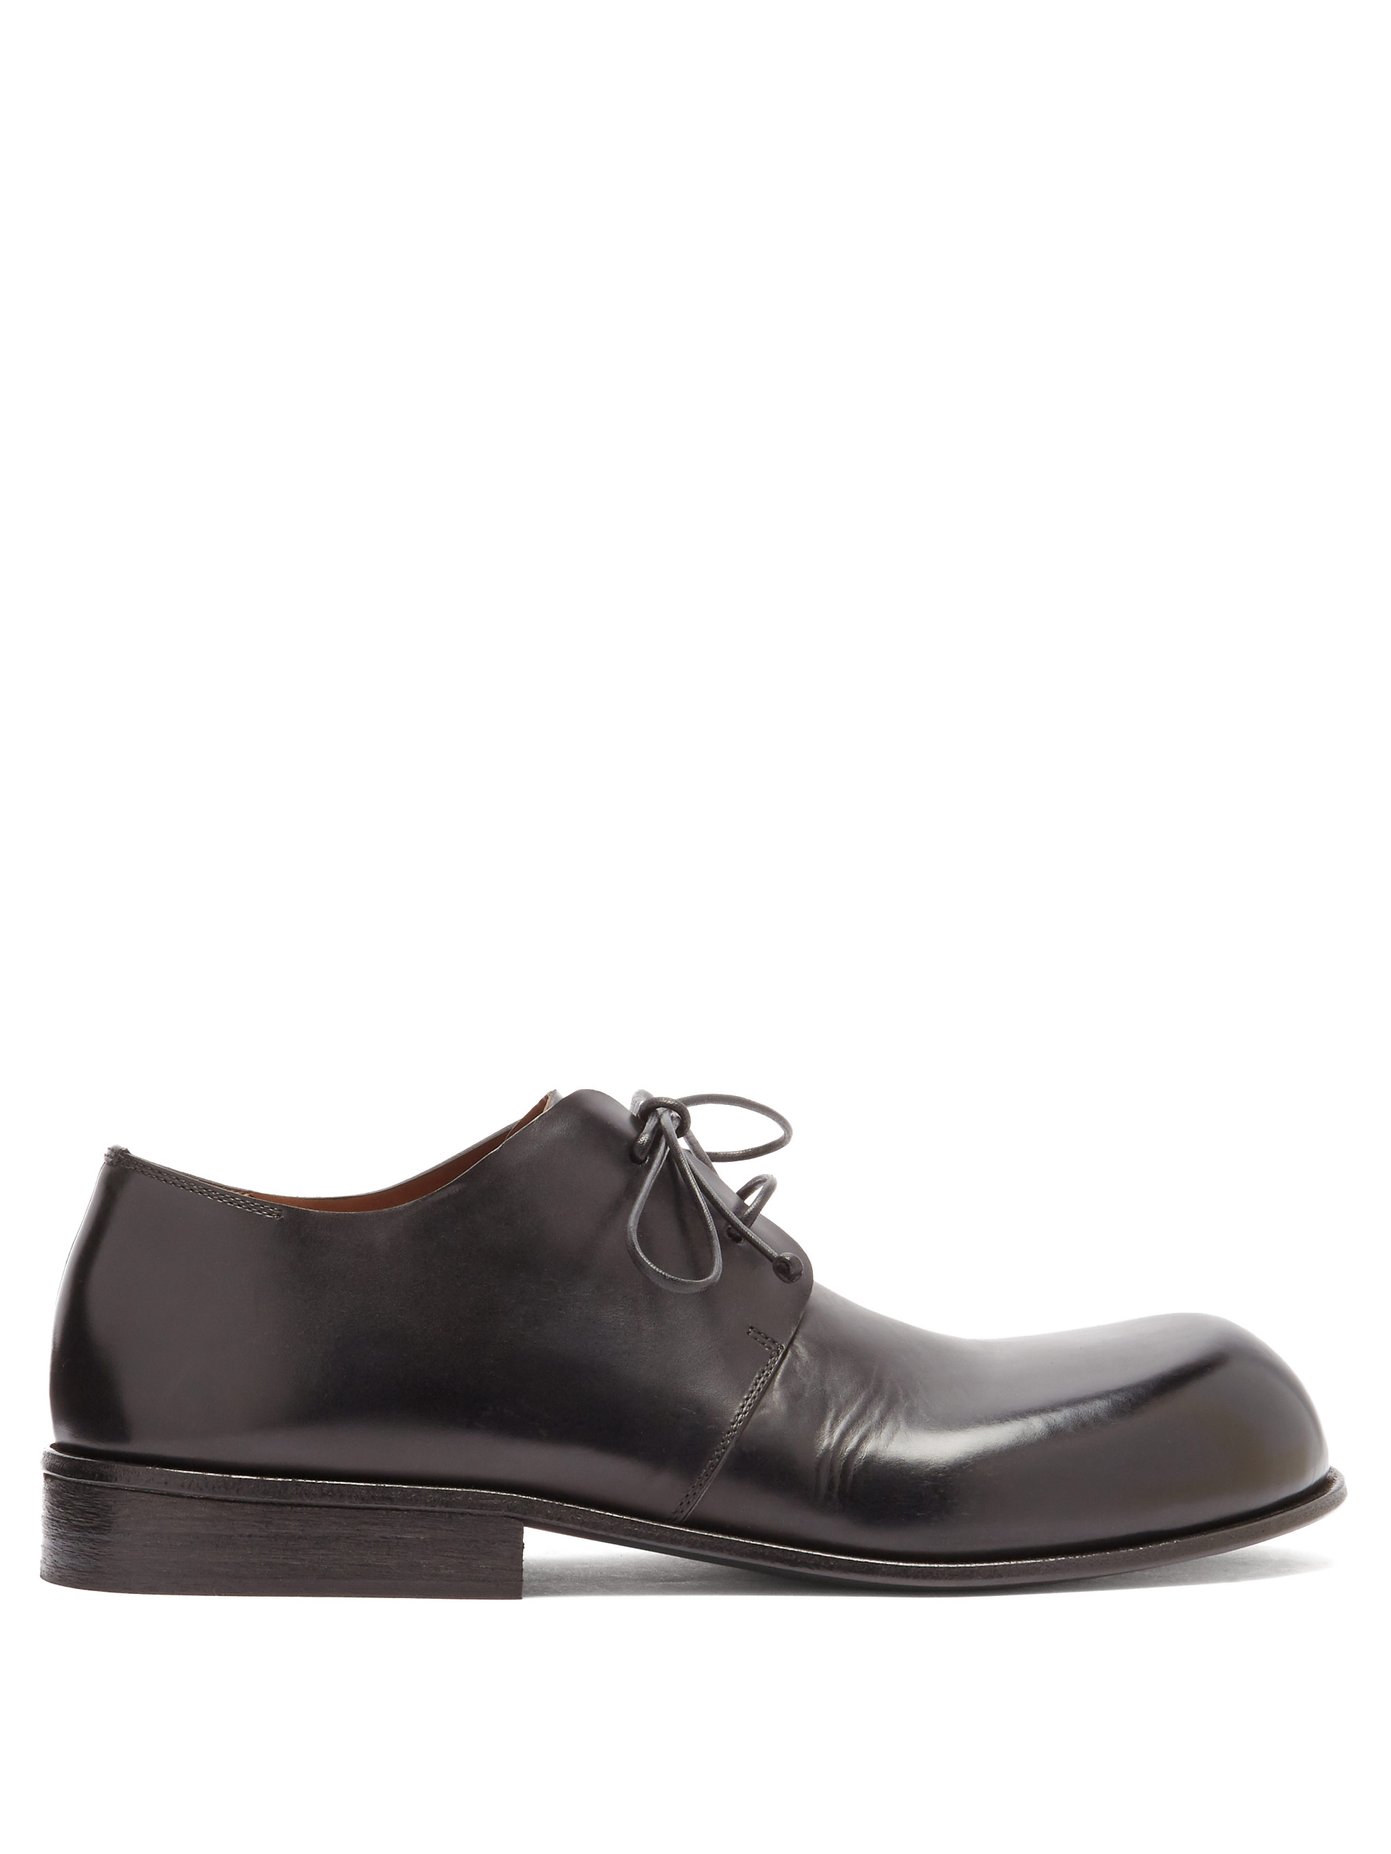 round toe derby shoes